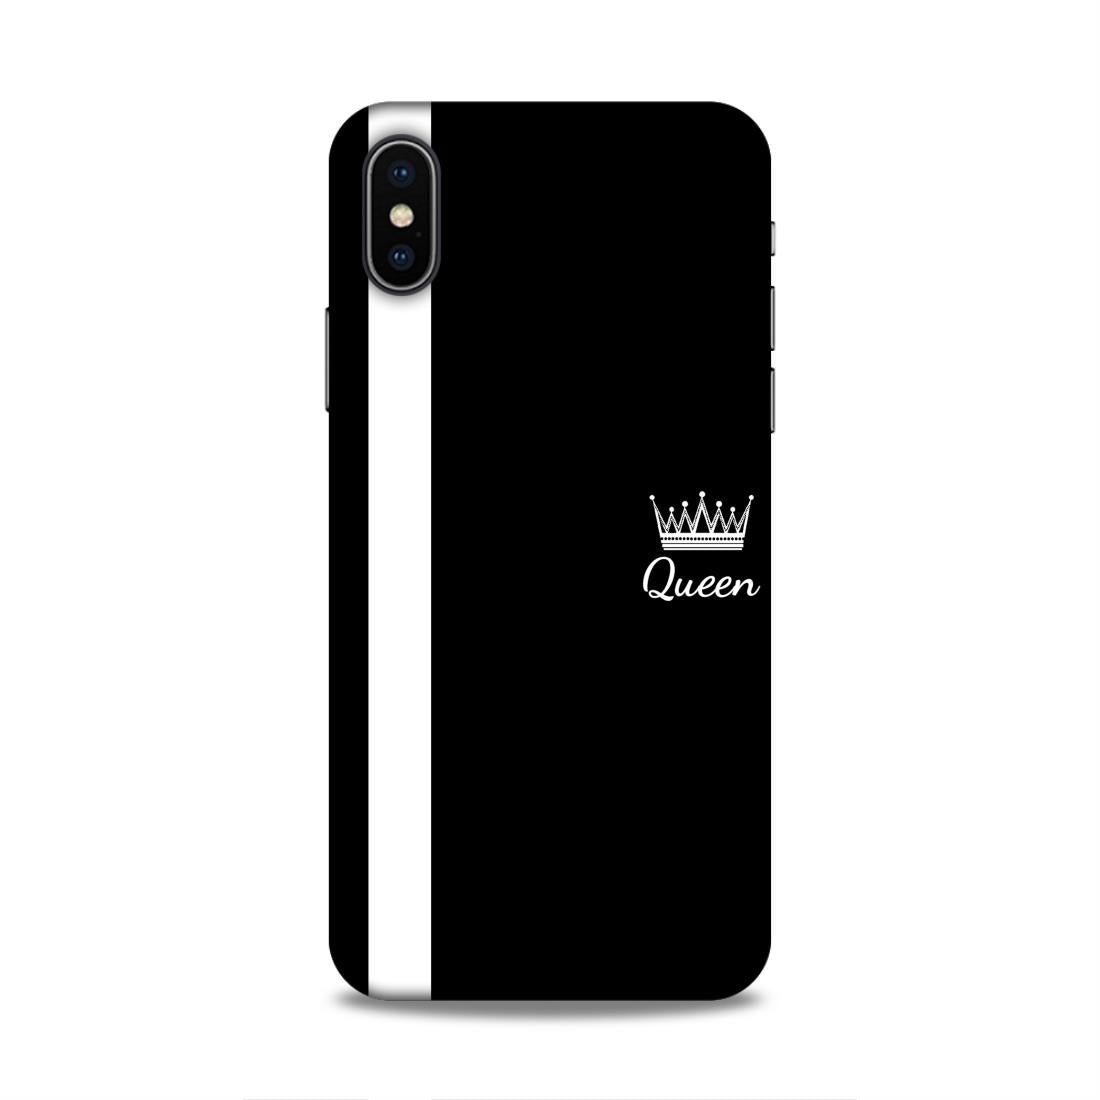 Queen Hard Back Case For Apple iPhone X/XS